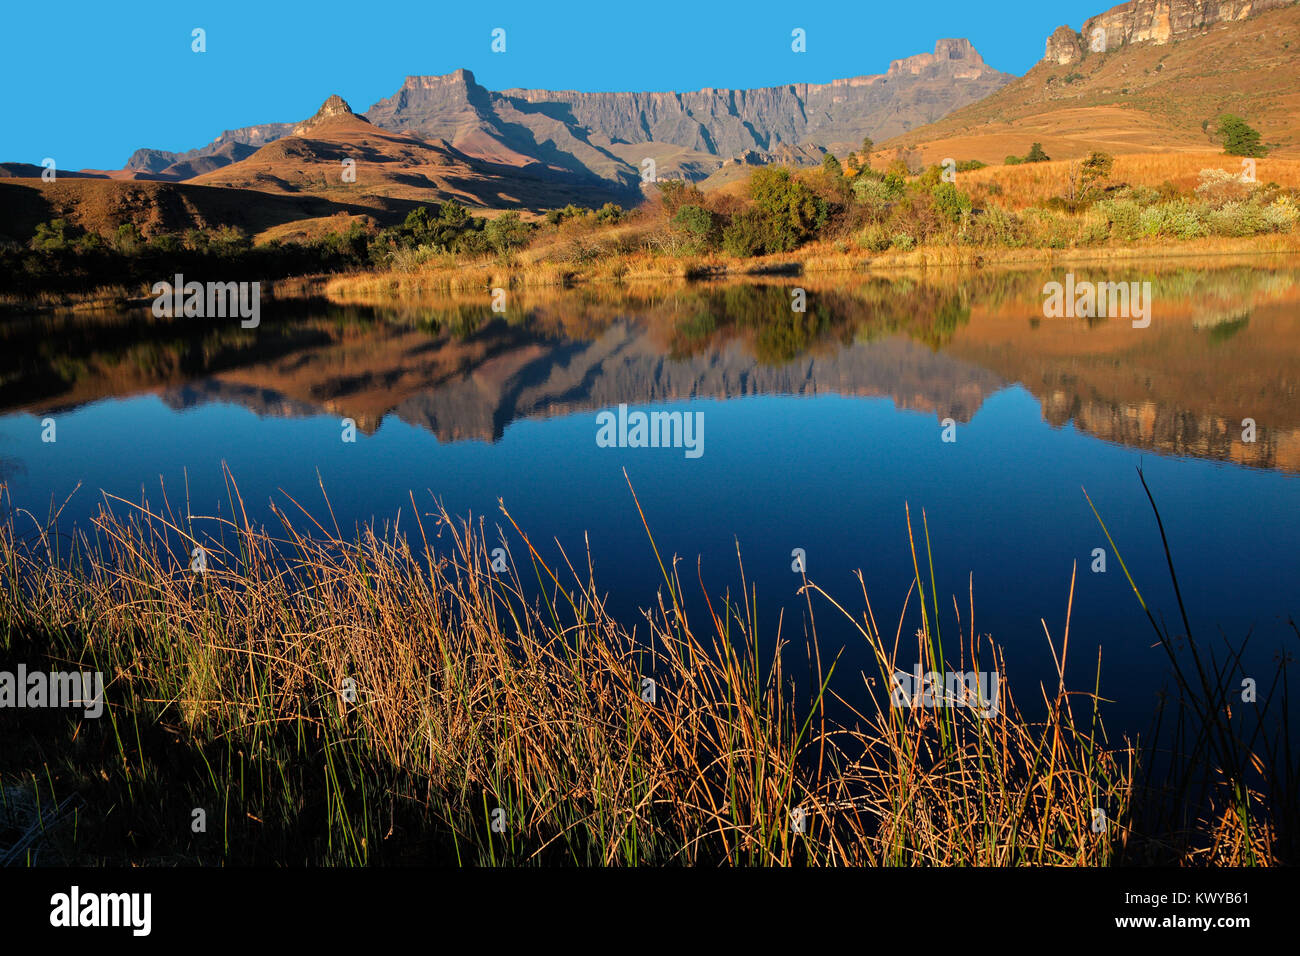 Mountains with reflection in water, Royal Natal National Park, South Africa Stock Photo